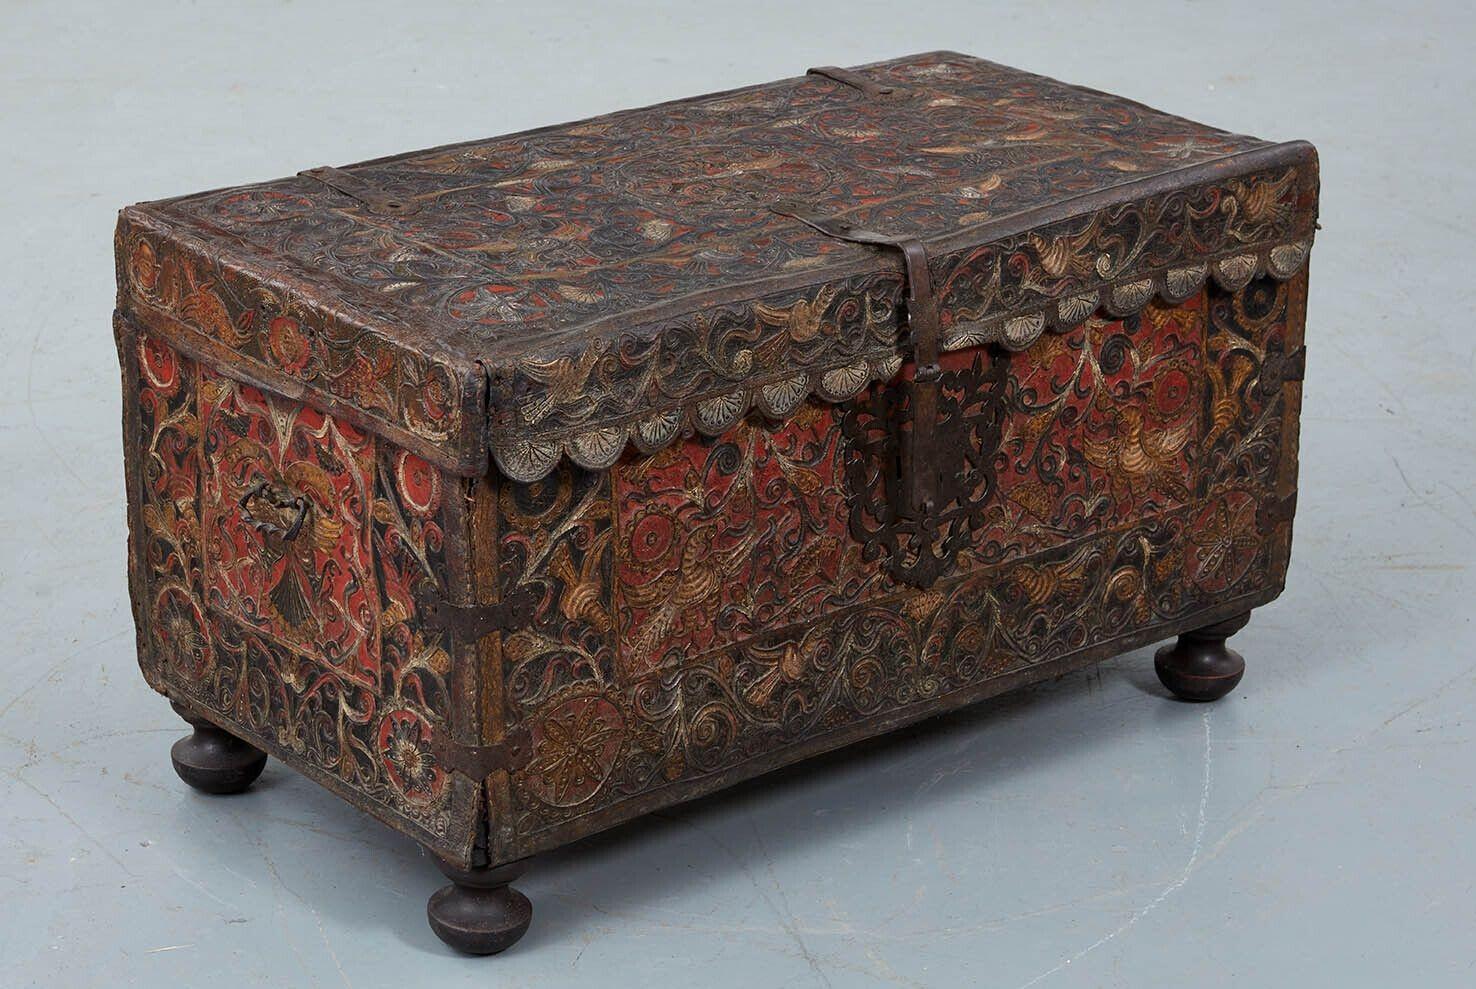 An early leather trunk decorated with complex rillette embossing and retaining elements of its original polychromed decoration. Hand-forged hinges, corner straps and a fabulous central lockplate under scalloped front edge, Standing on later bun